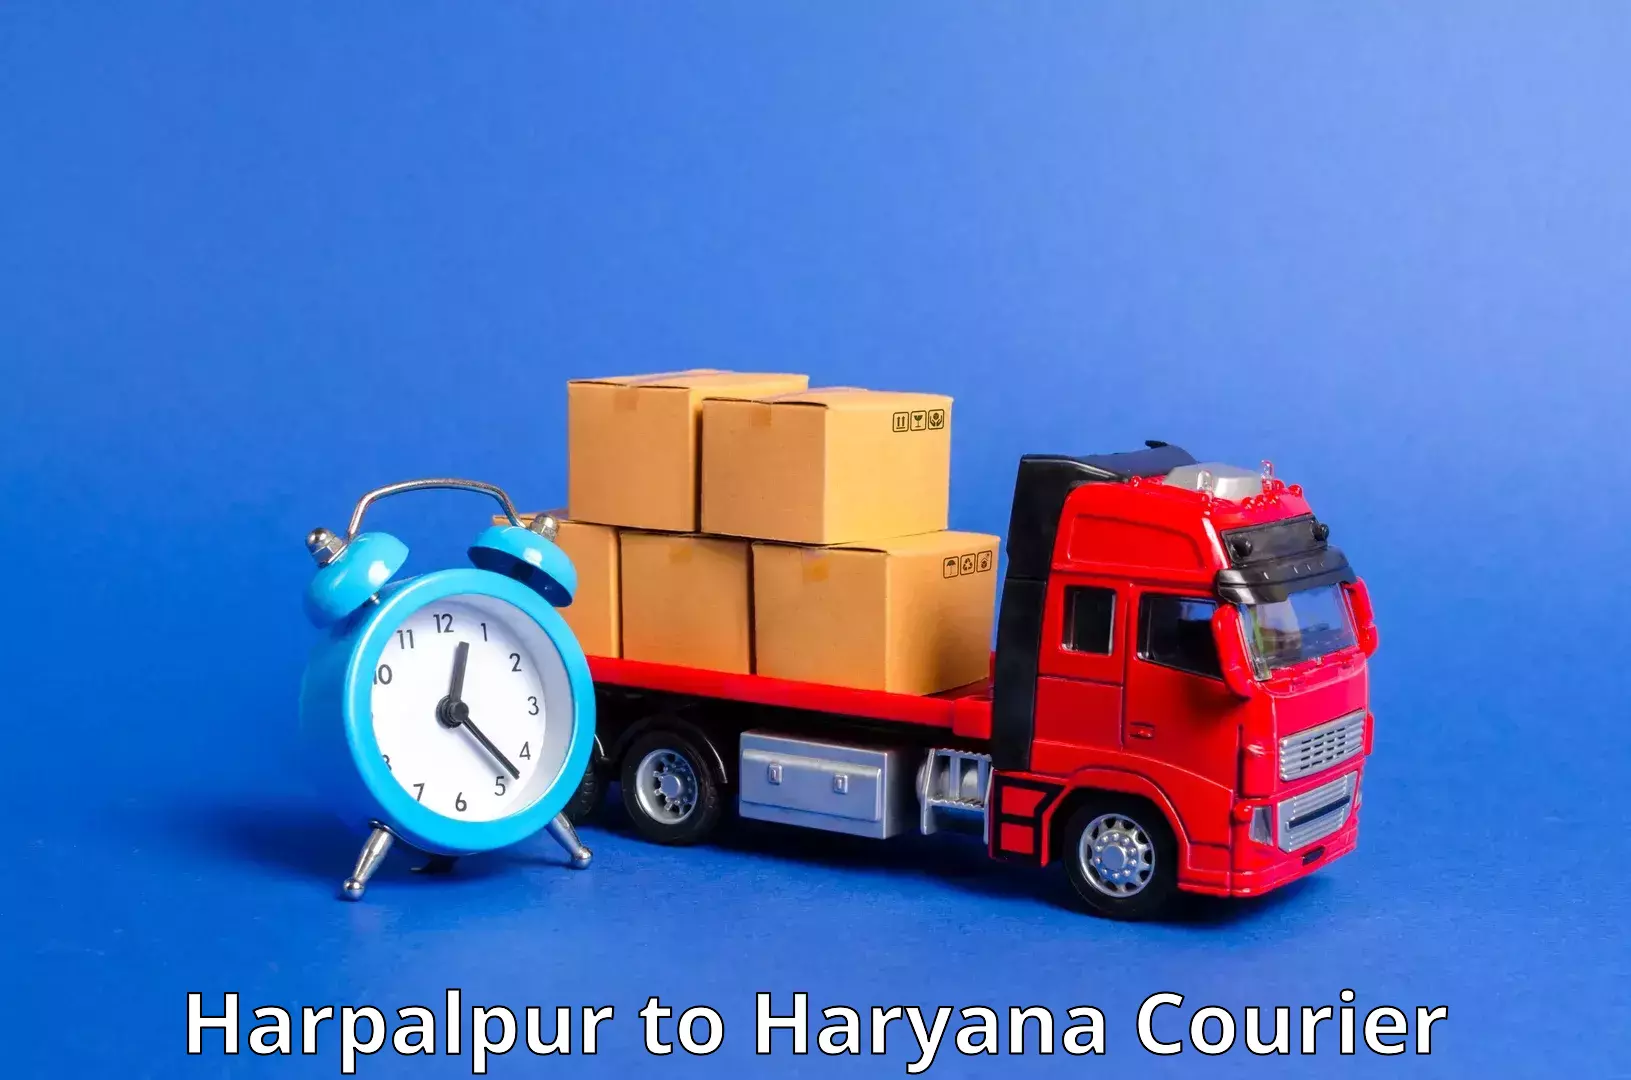 Next-day delivery options Harpalpur to Faridabad